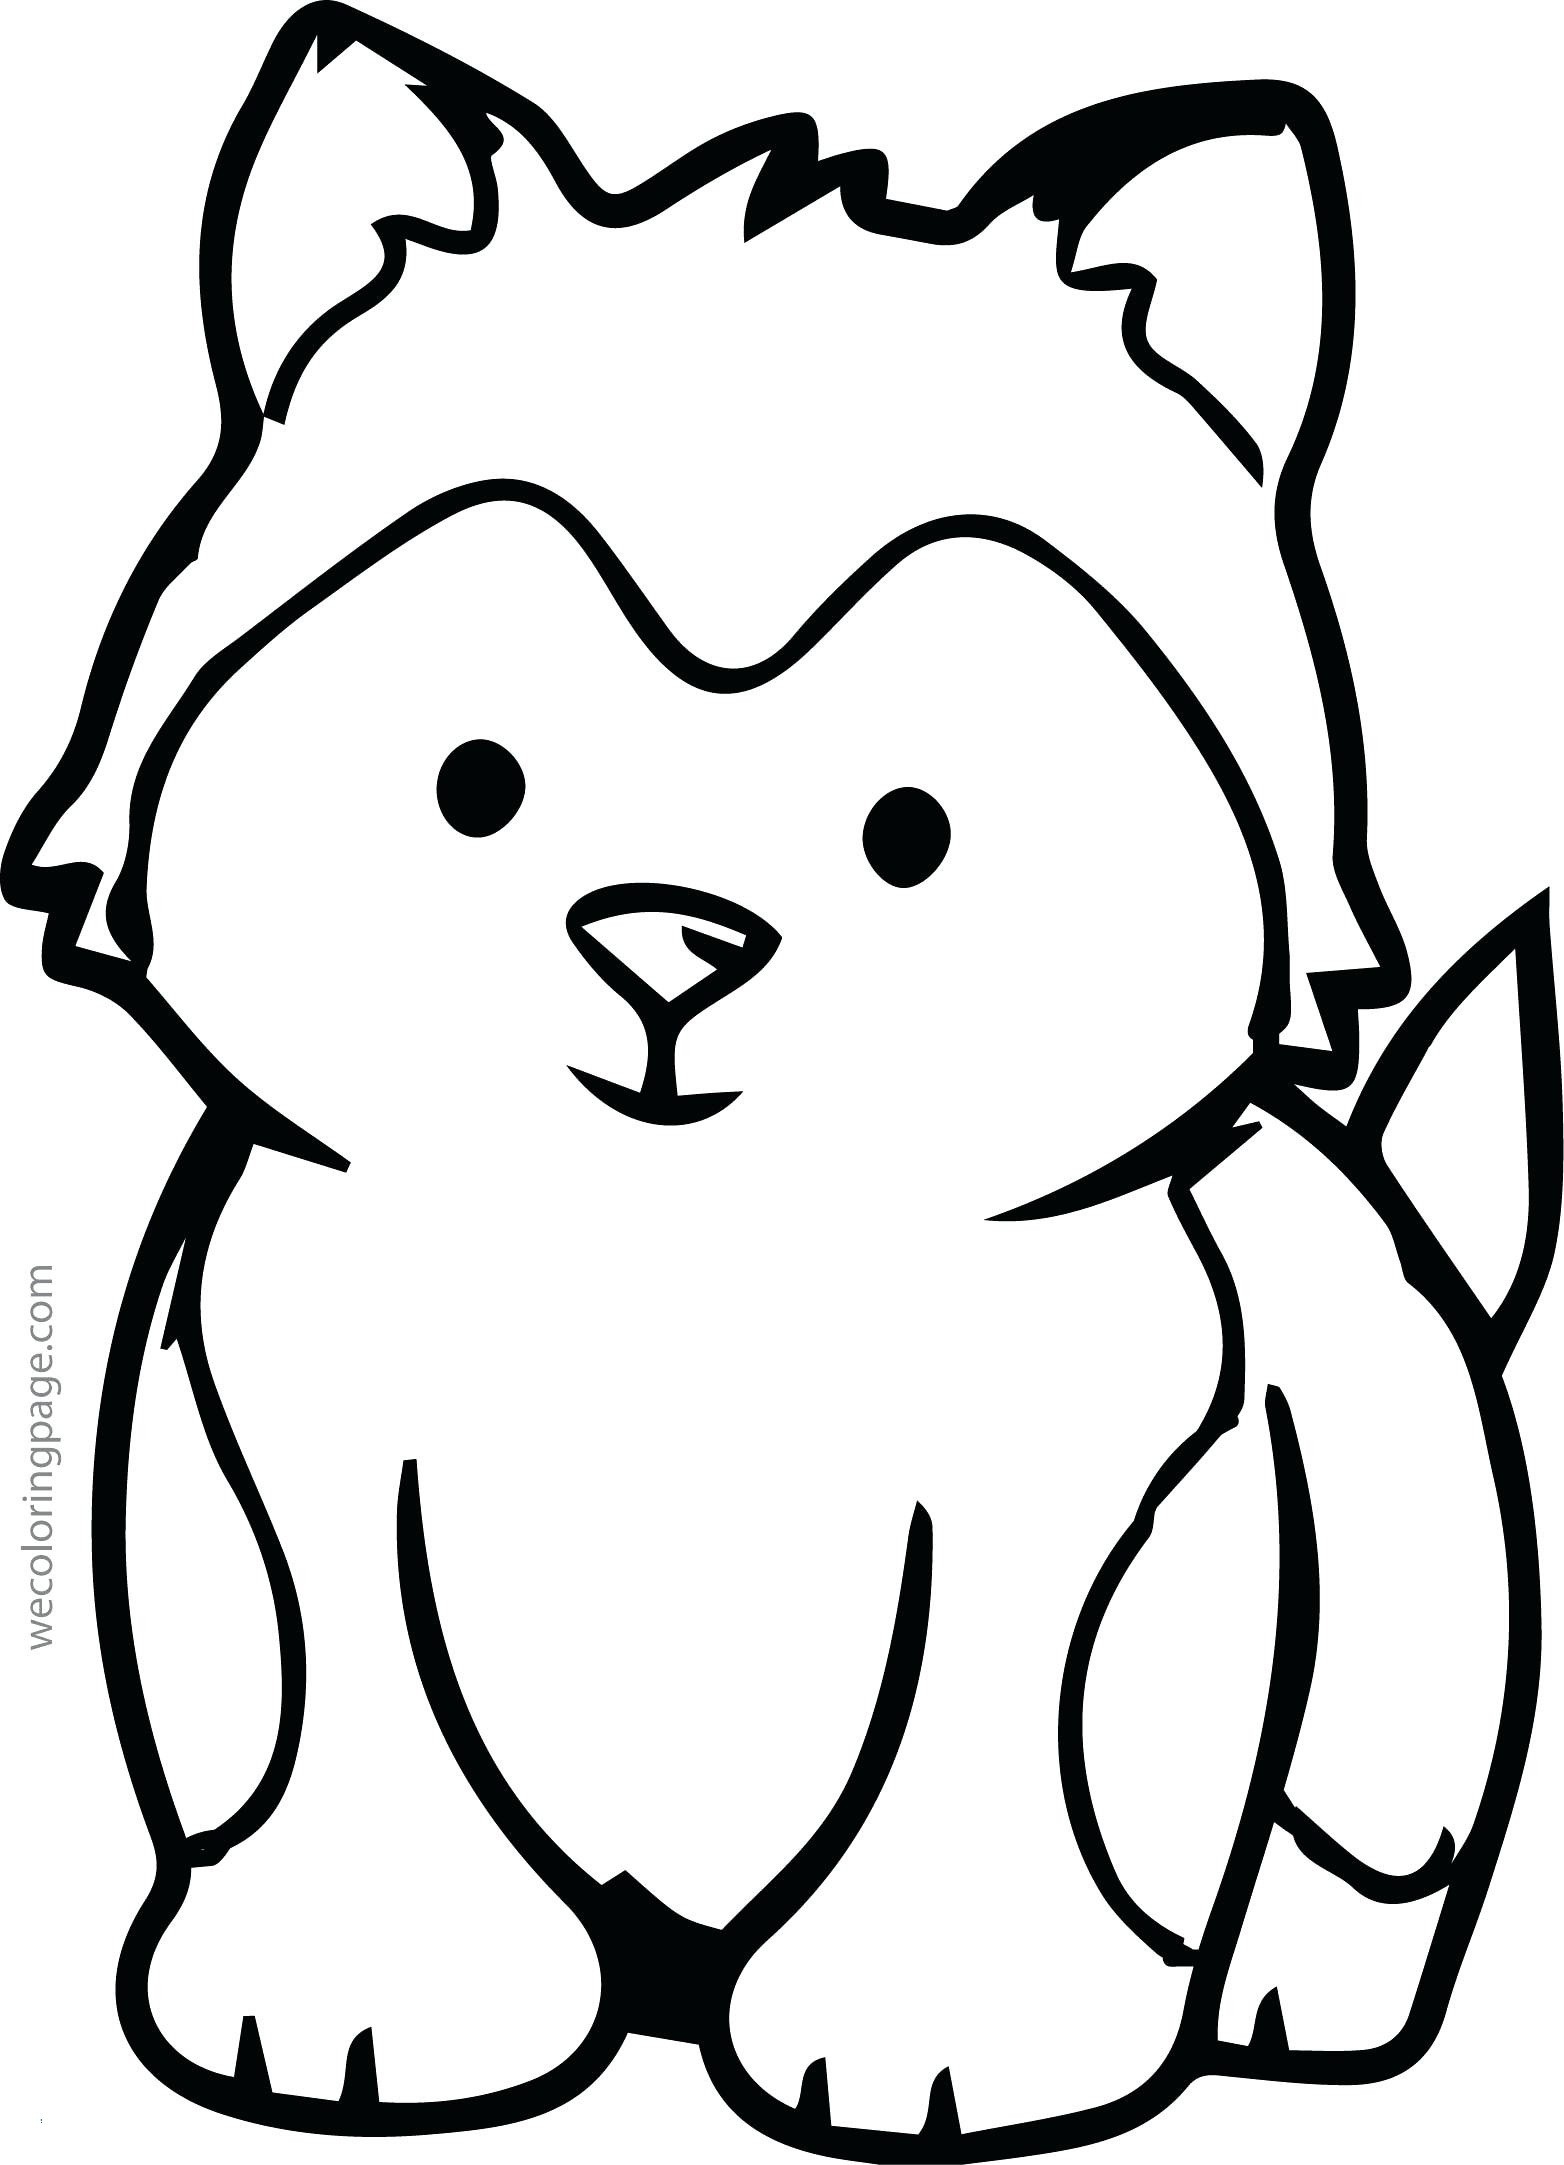 Free Coloring Pages Animals New Animal Coloring Pages Elegant Husky Coloring 0d Free Coloring Pages